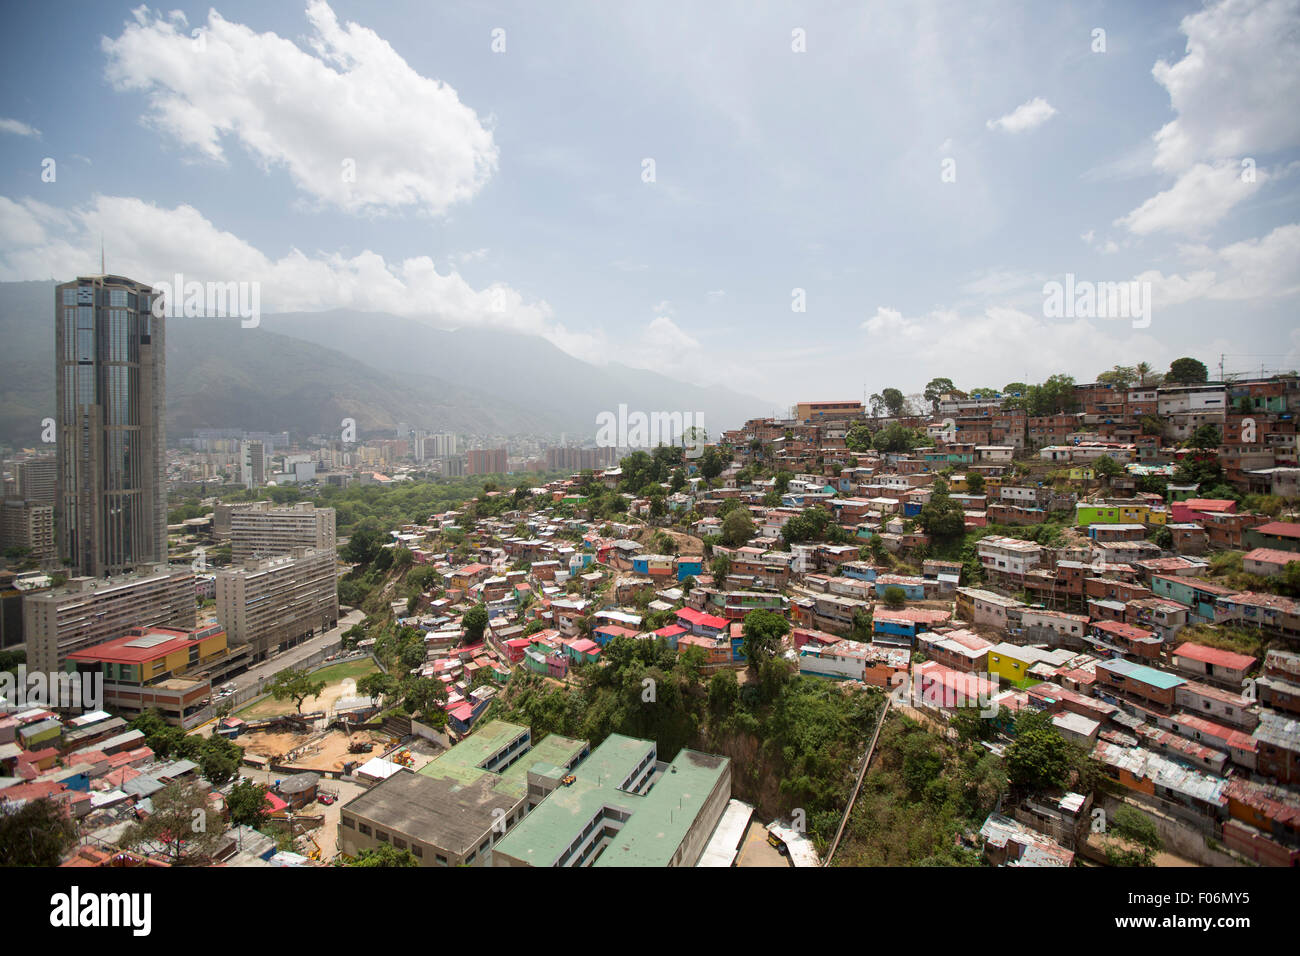 Small wooden colored houses in the poor neighborhood in Caracas. It cover the hills around Caracas and it is dangerous. Stock Photo